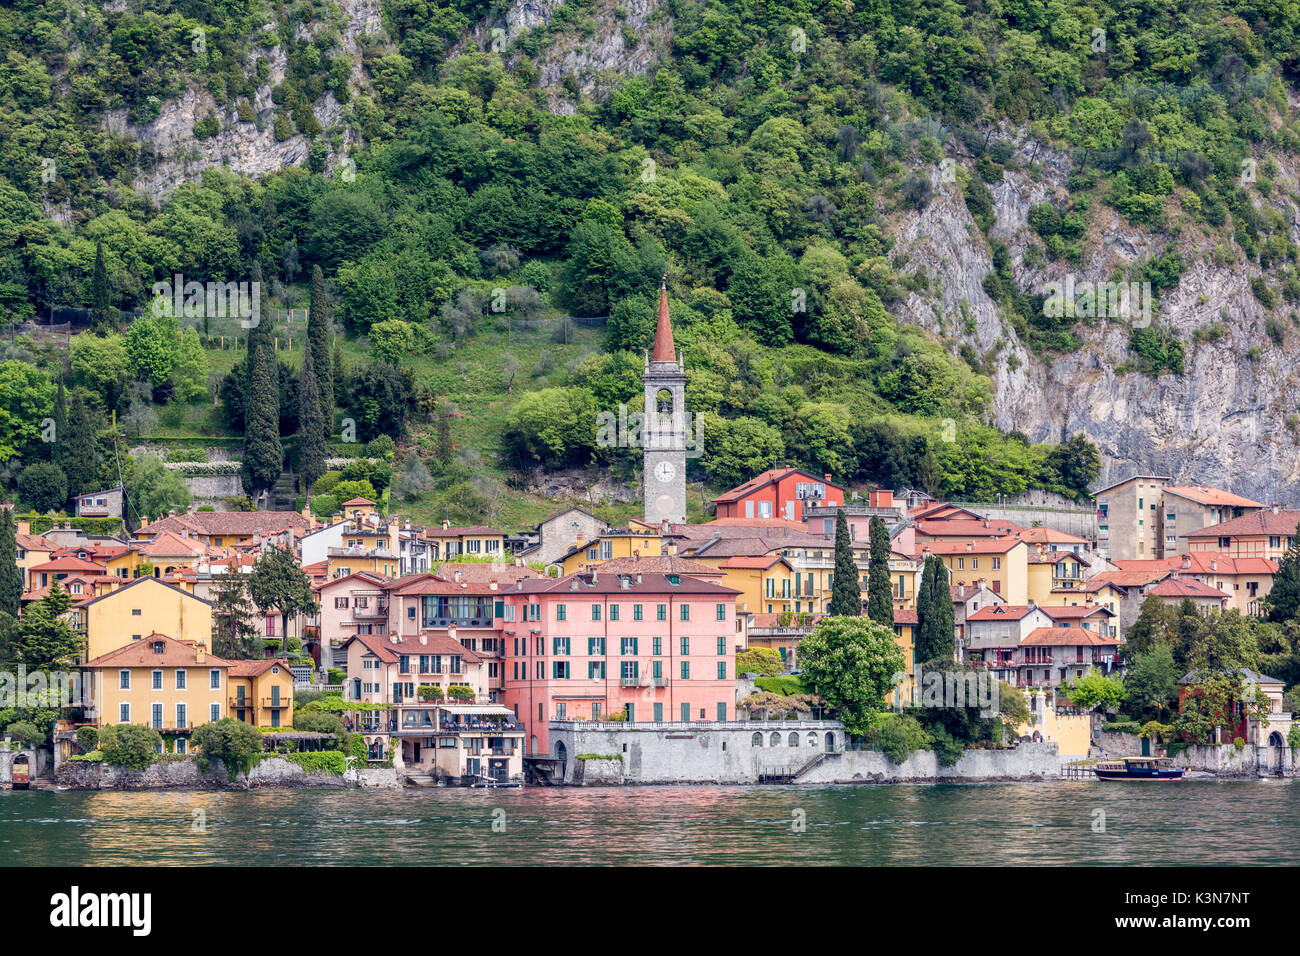 The little town of Varenna, Lake Como, Lombardy, Italy. Stock Photo